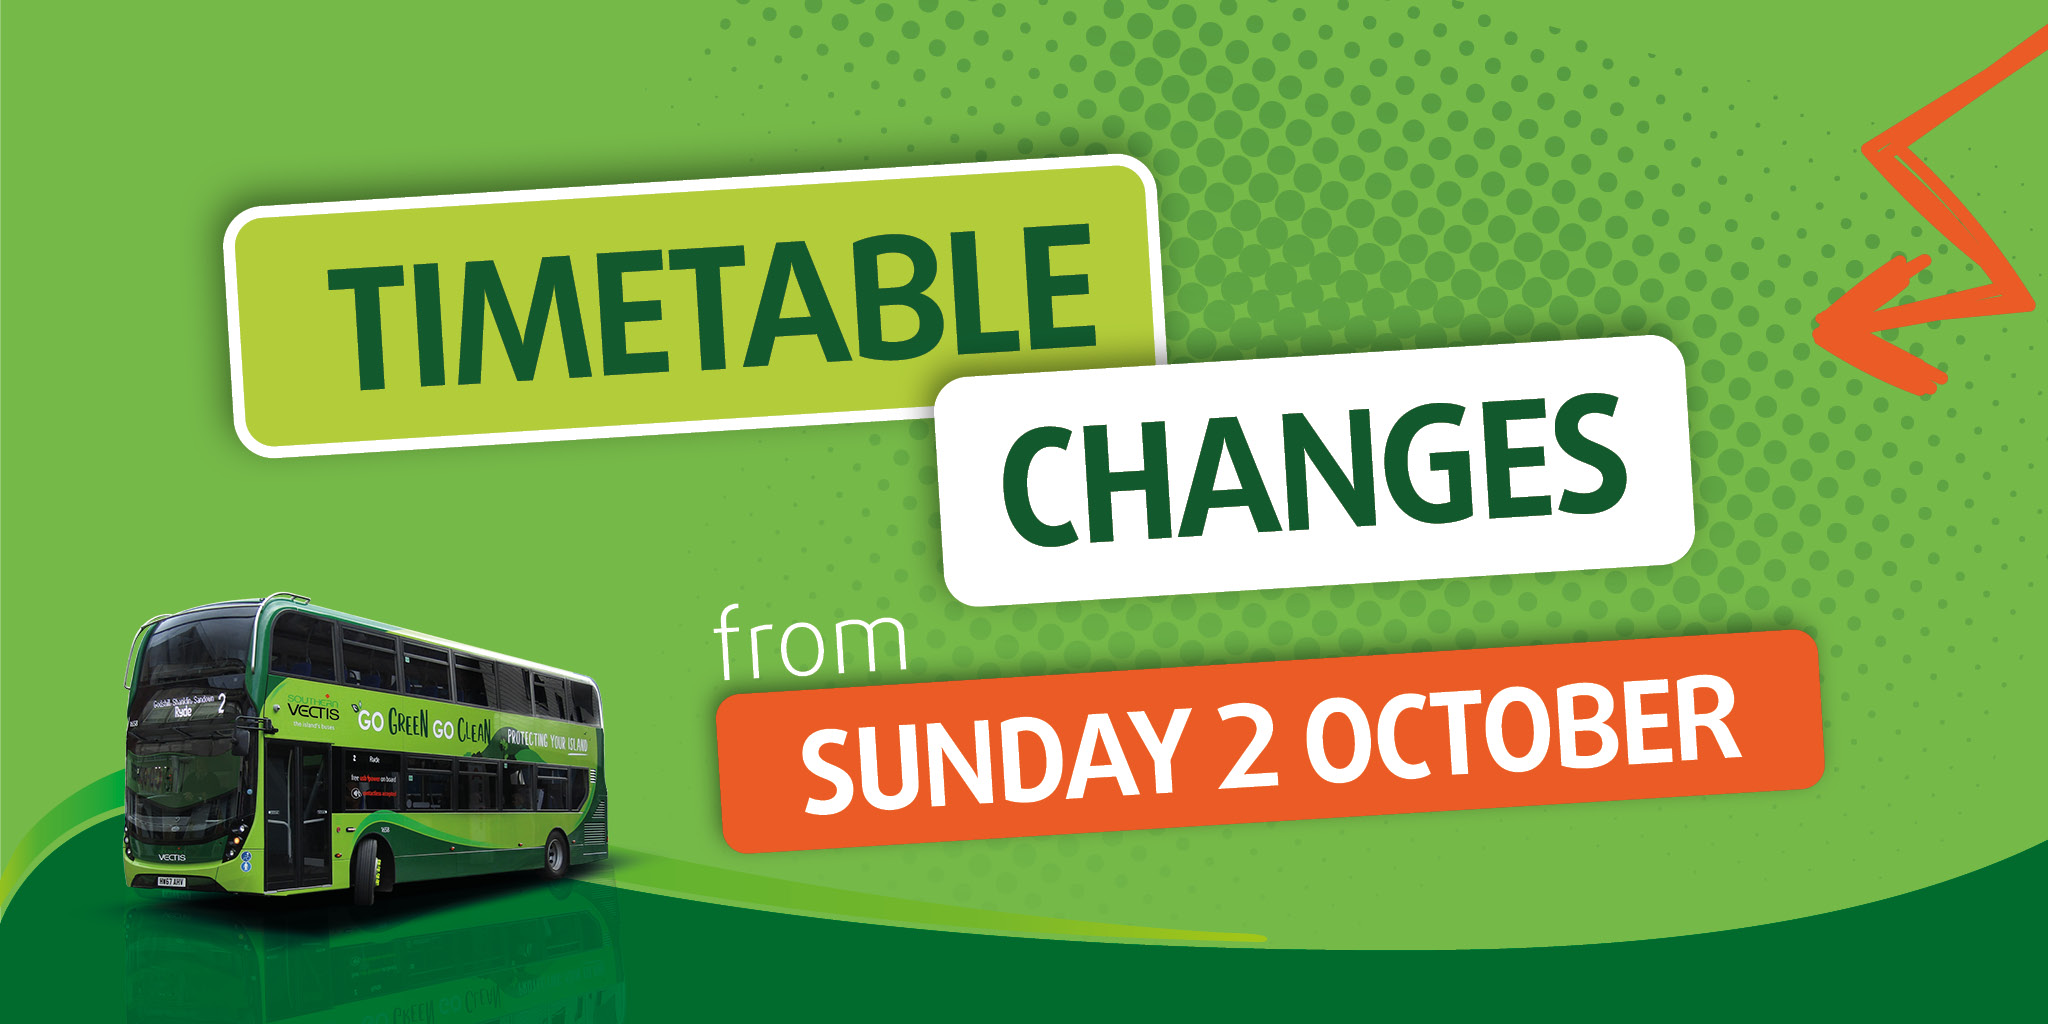 timetable changes from sunday 2 october